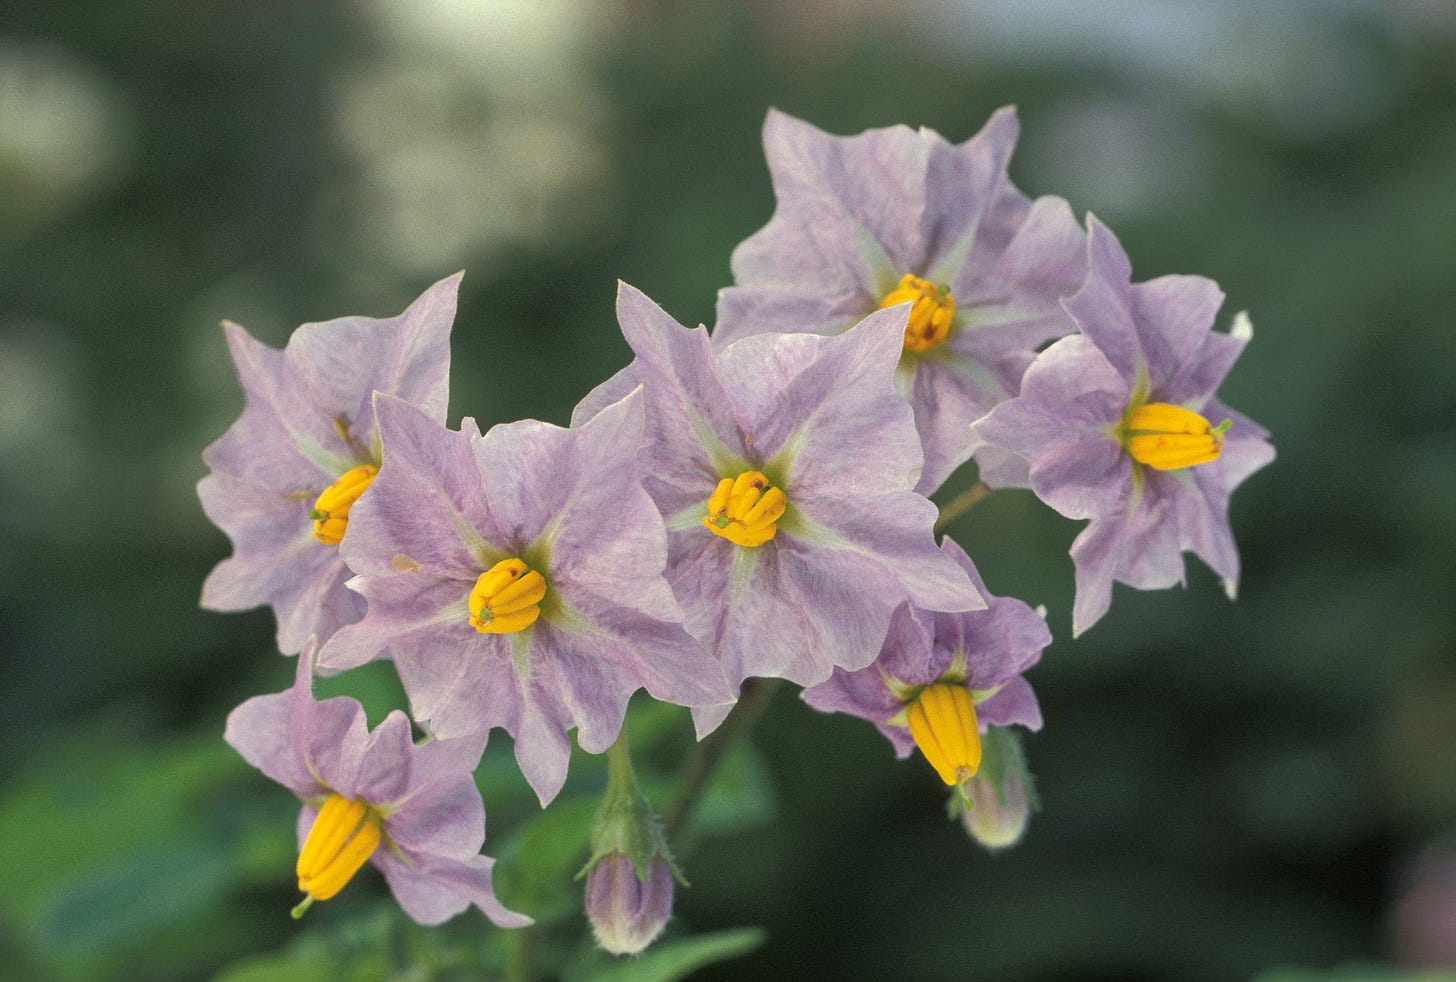 photo of purple potato flowers with yellow stamens by Keith Weller via wikipedia & the usda